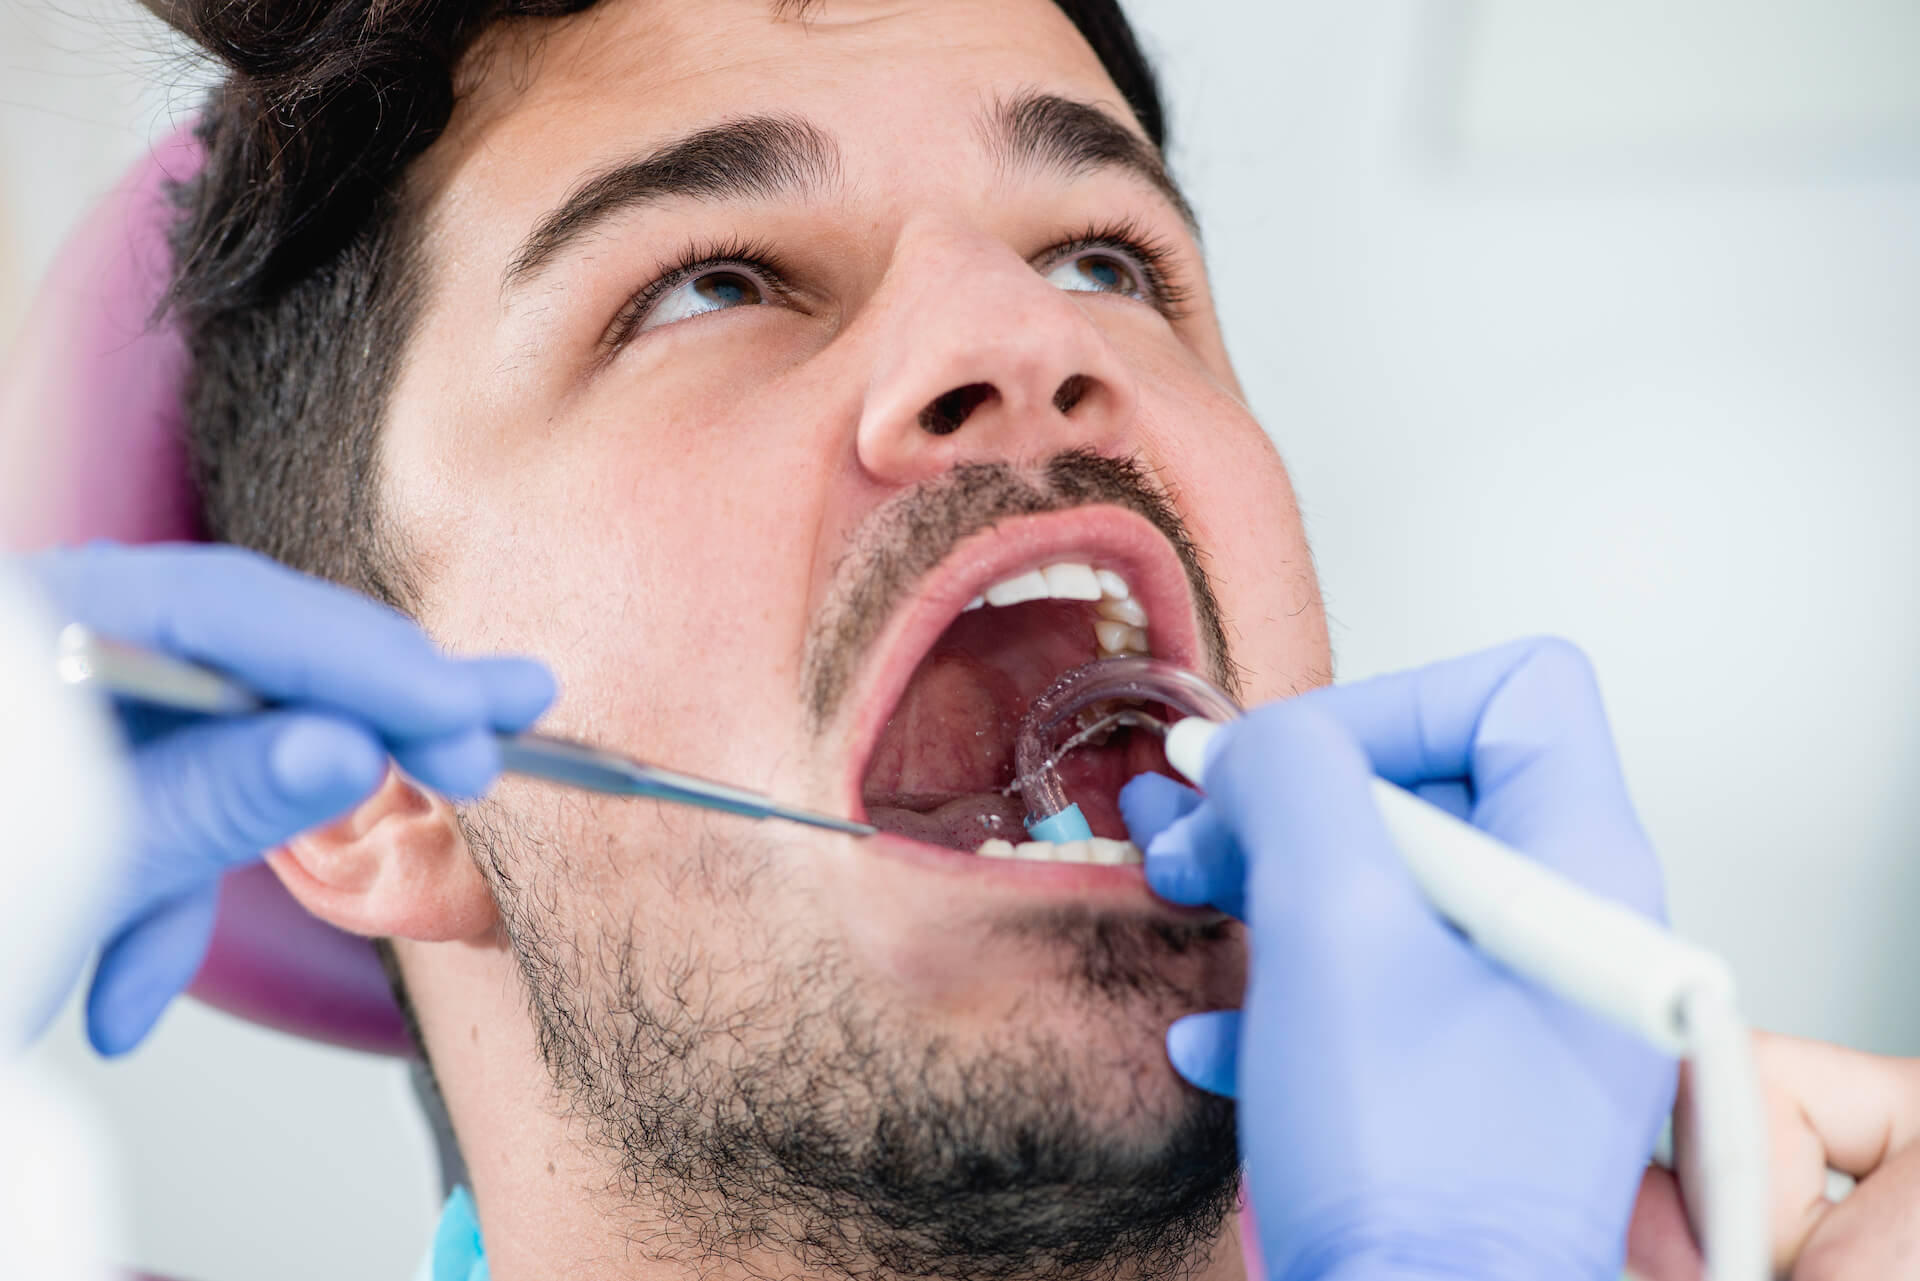 Man undergoing professional teeth cleaning.